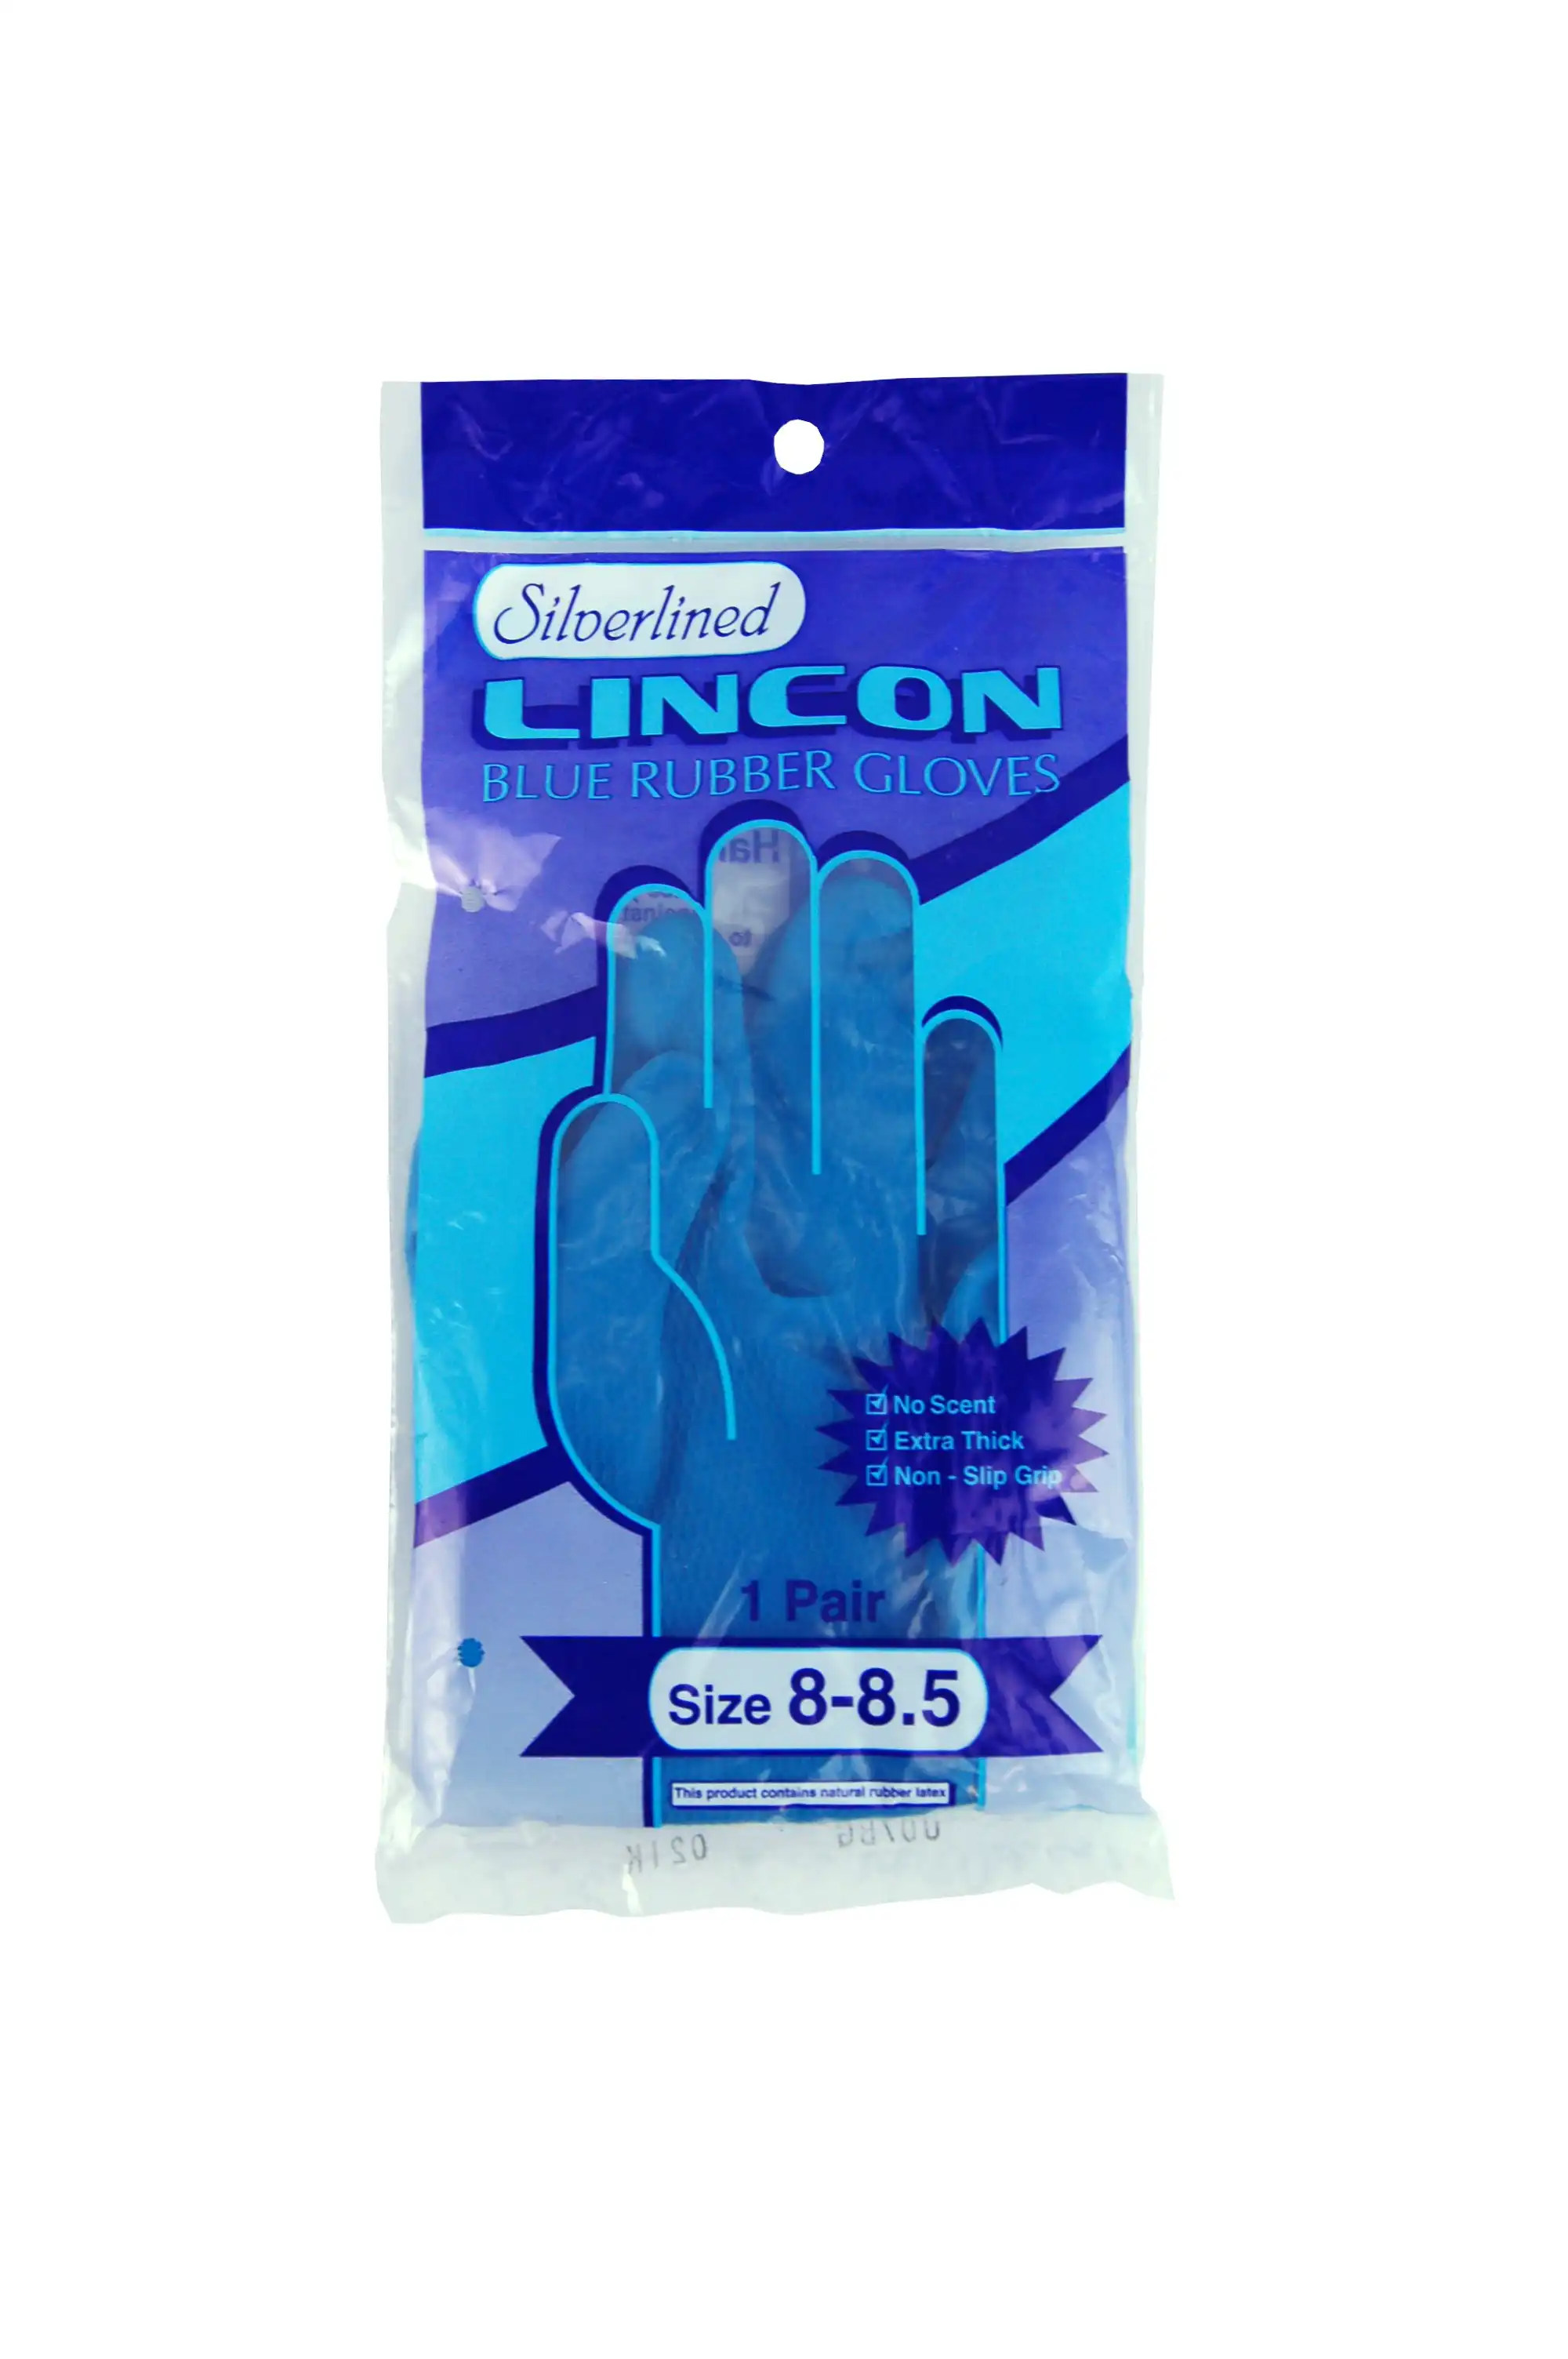 Lincon Silverlined Natural Rubber Gloves with Silver Lining Biodegradable Size 8-8.5 Blue Unscented Pair